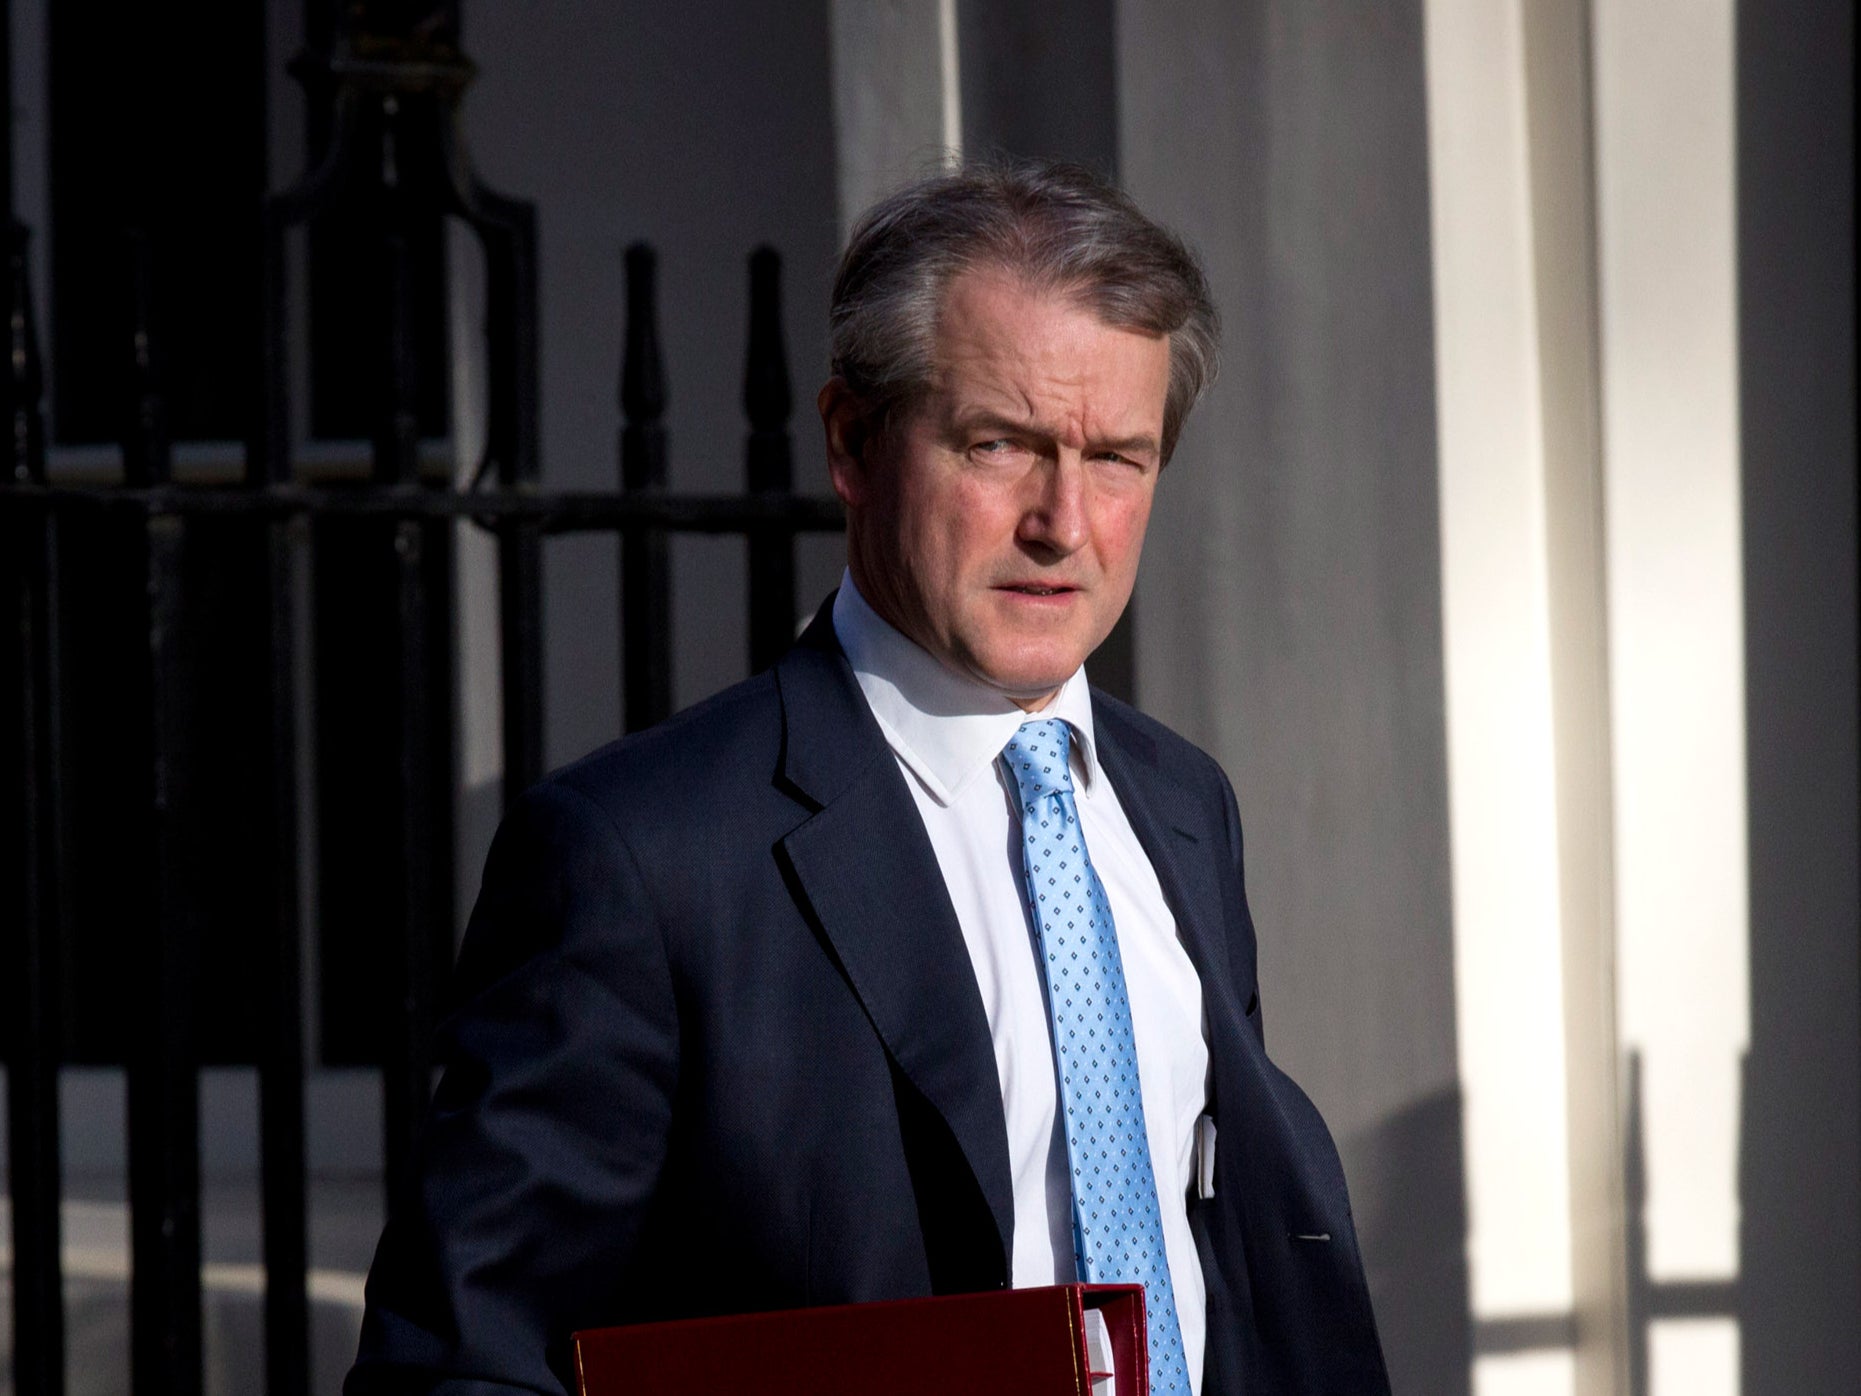 Owen Paterson has stepped down as MP for North Shropshire